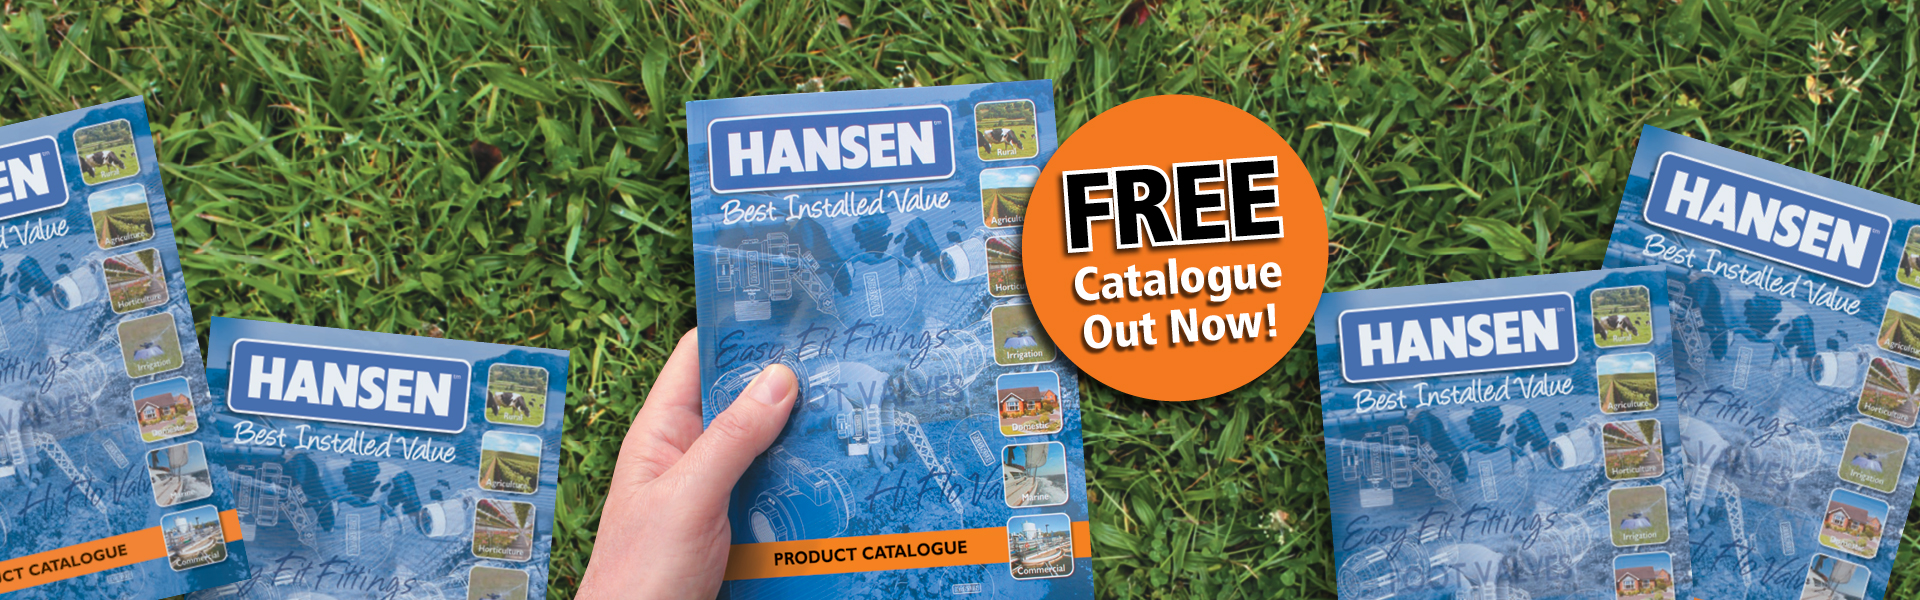 Get your FREE Catalogue